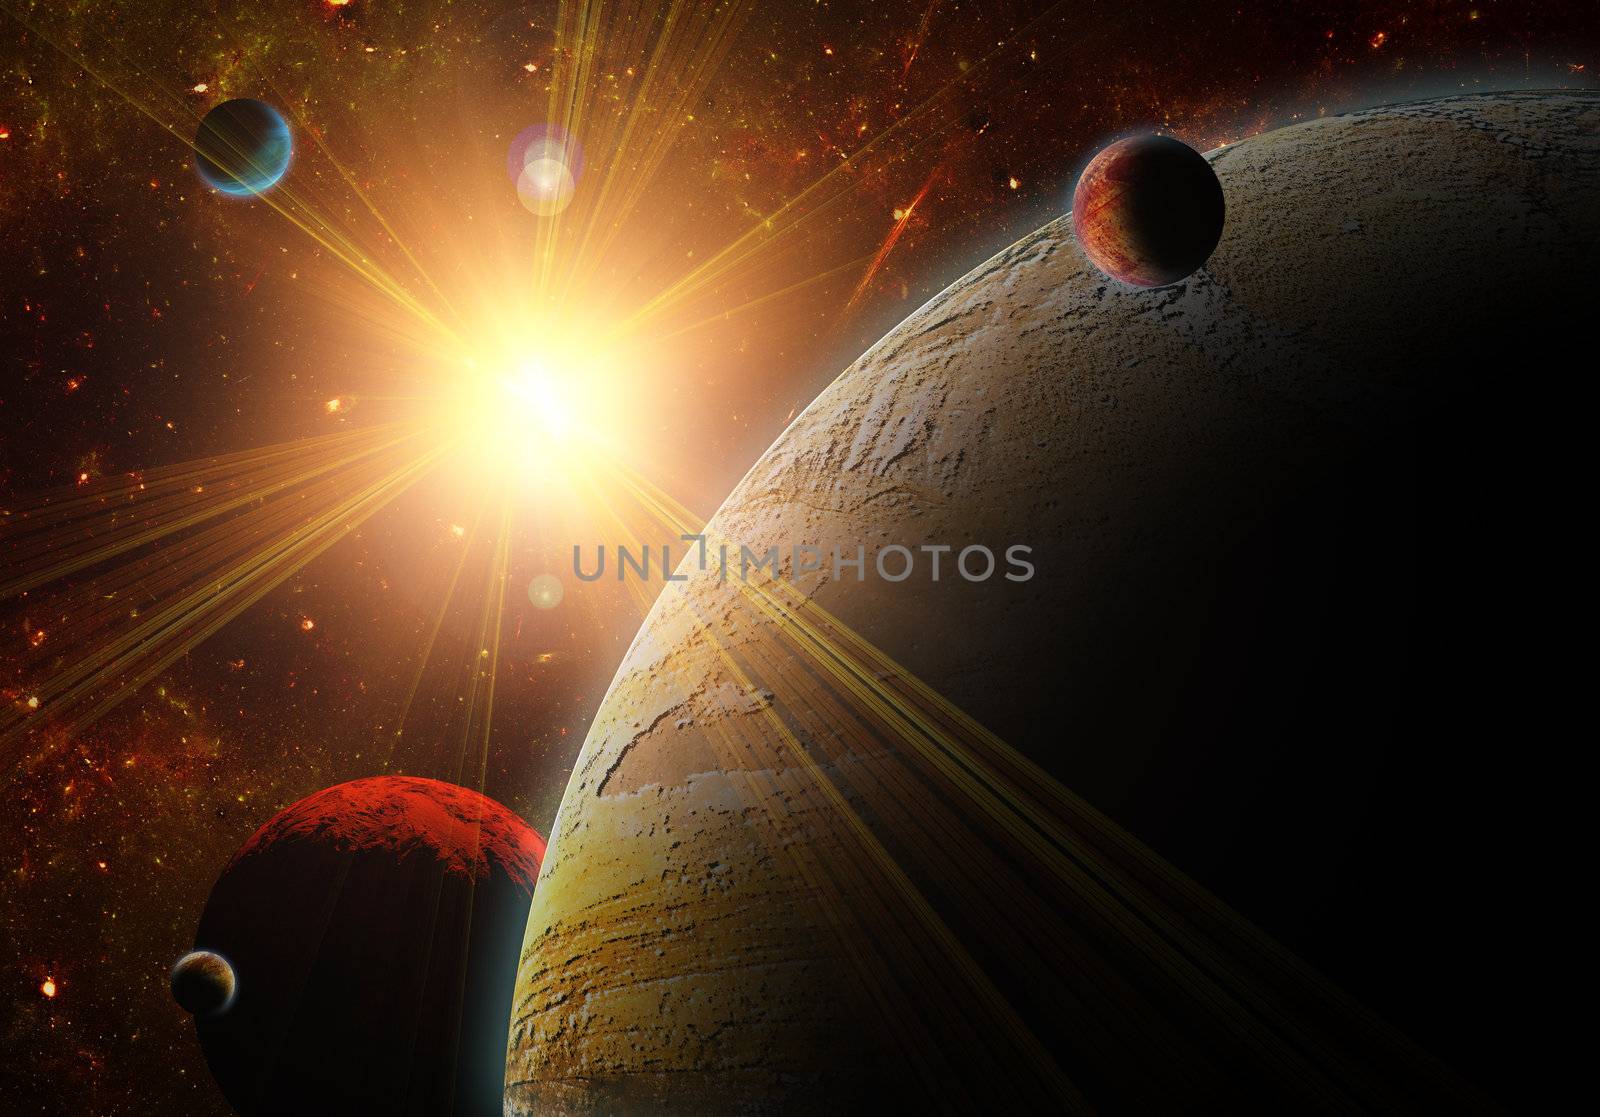 A view of planet, moons and the universe from the earth surface. Abstract illustration of distant regions.